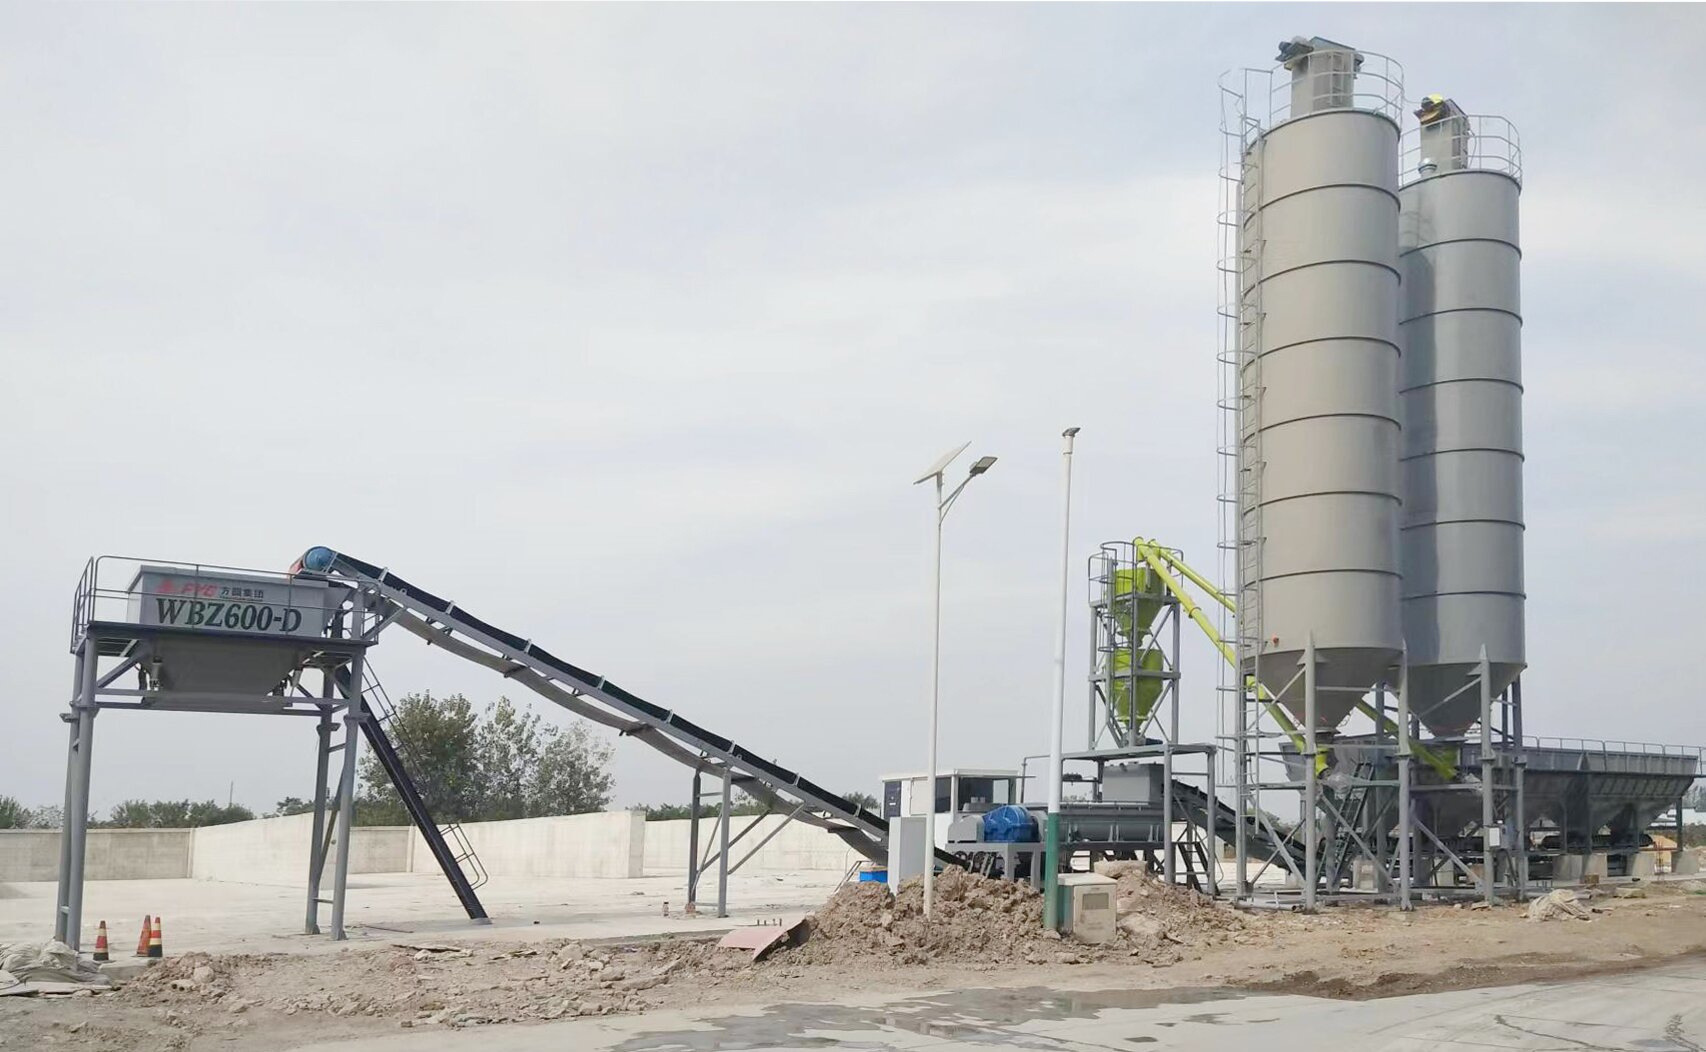 WBZ600-D Stabilized Soil Mixing Station of Fangyuan Group Helps Anhui G329 Highway Reconstruction and Expansion Project